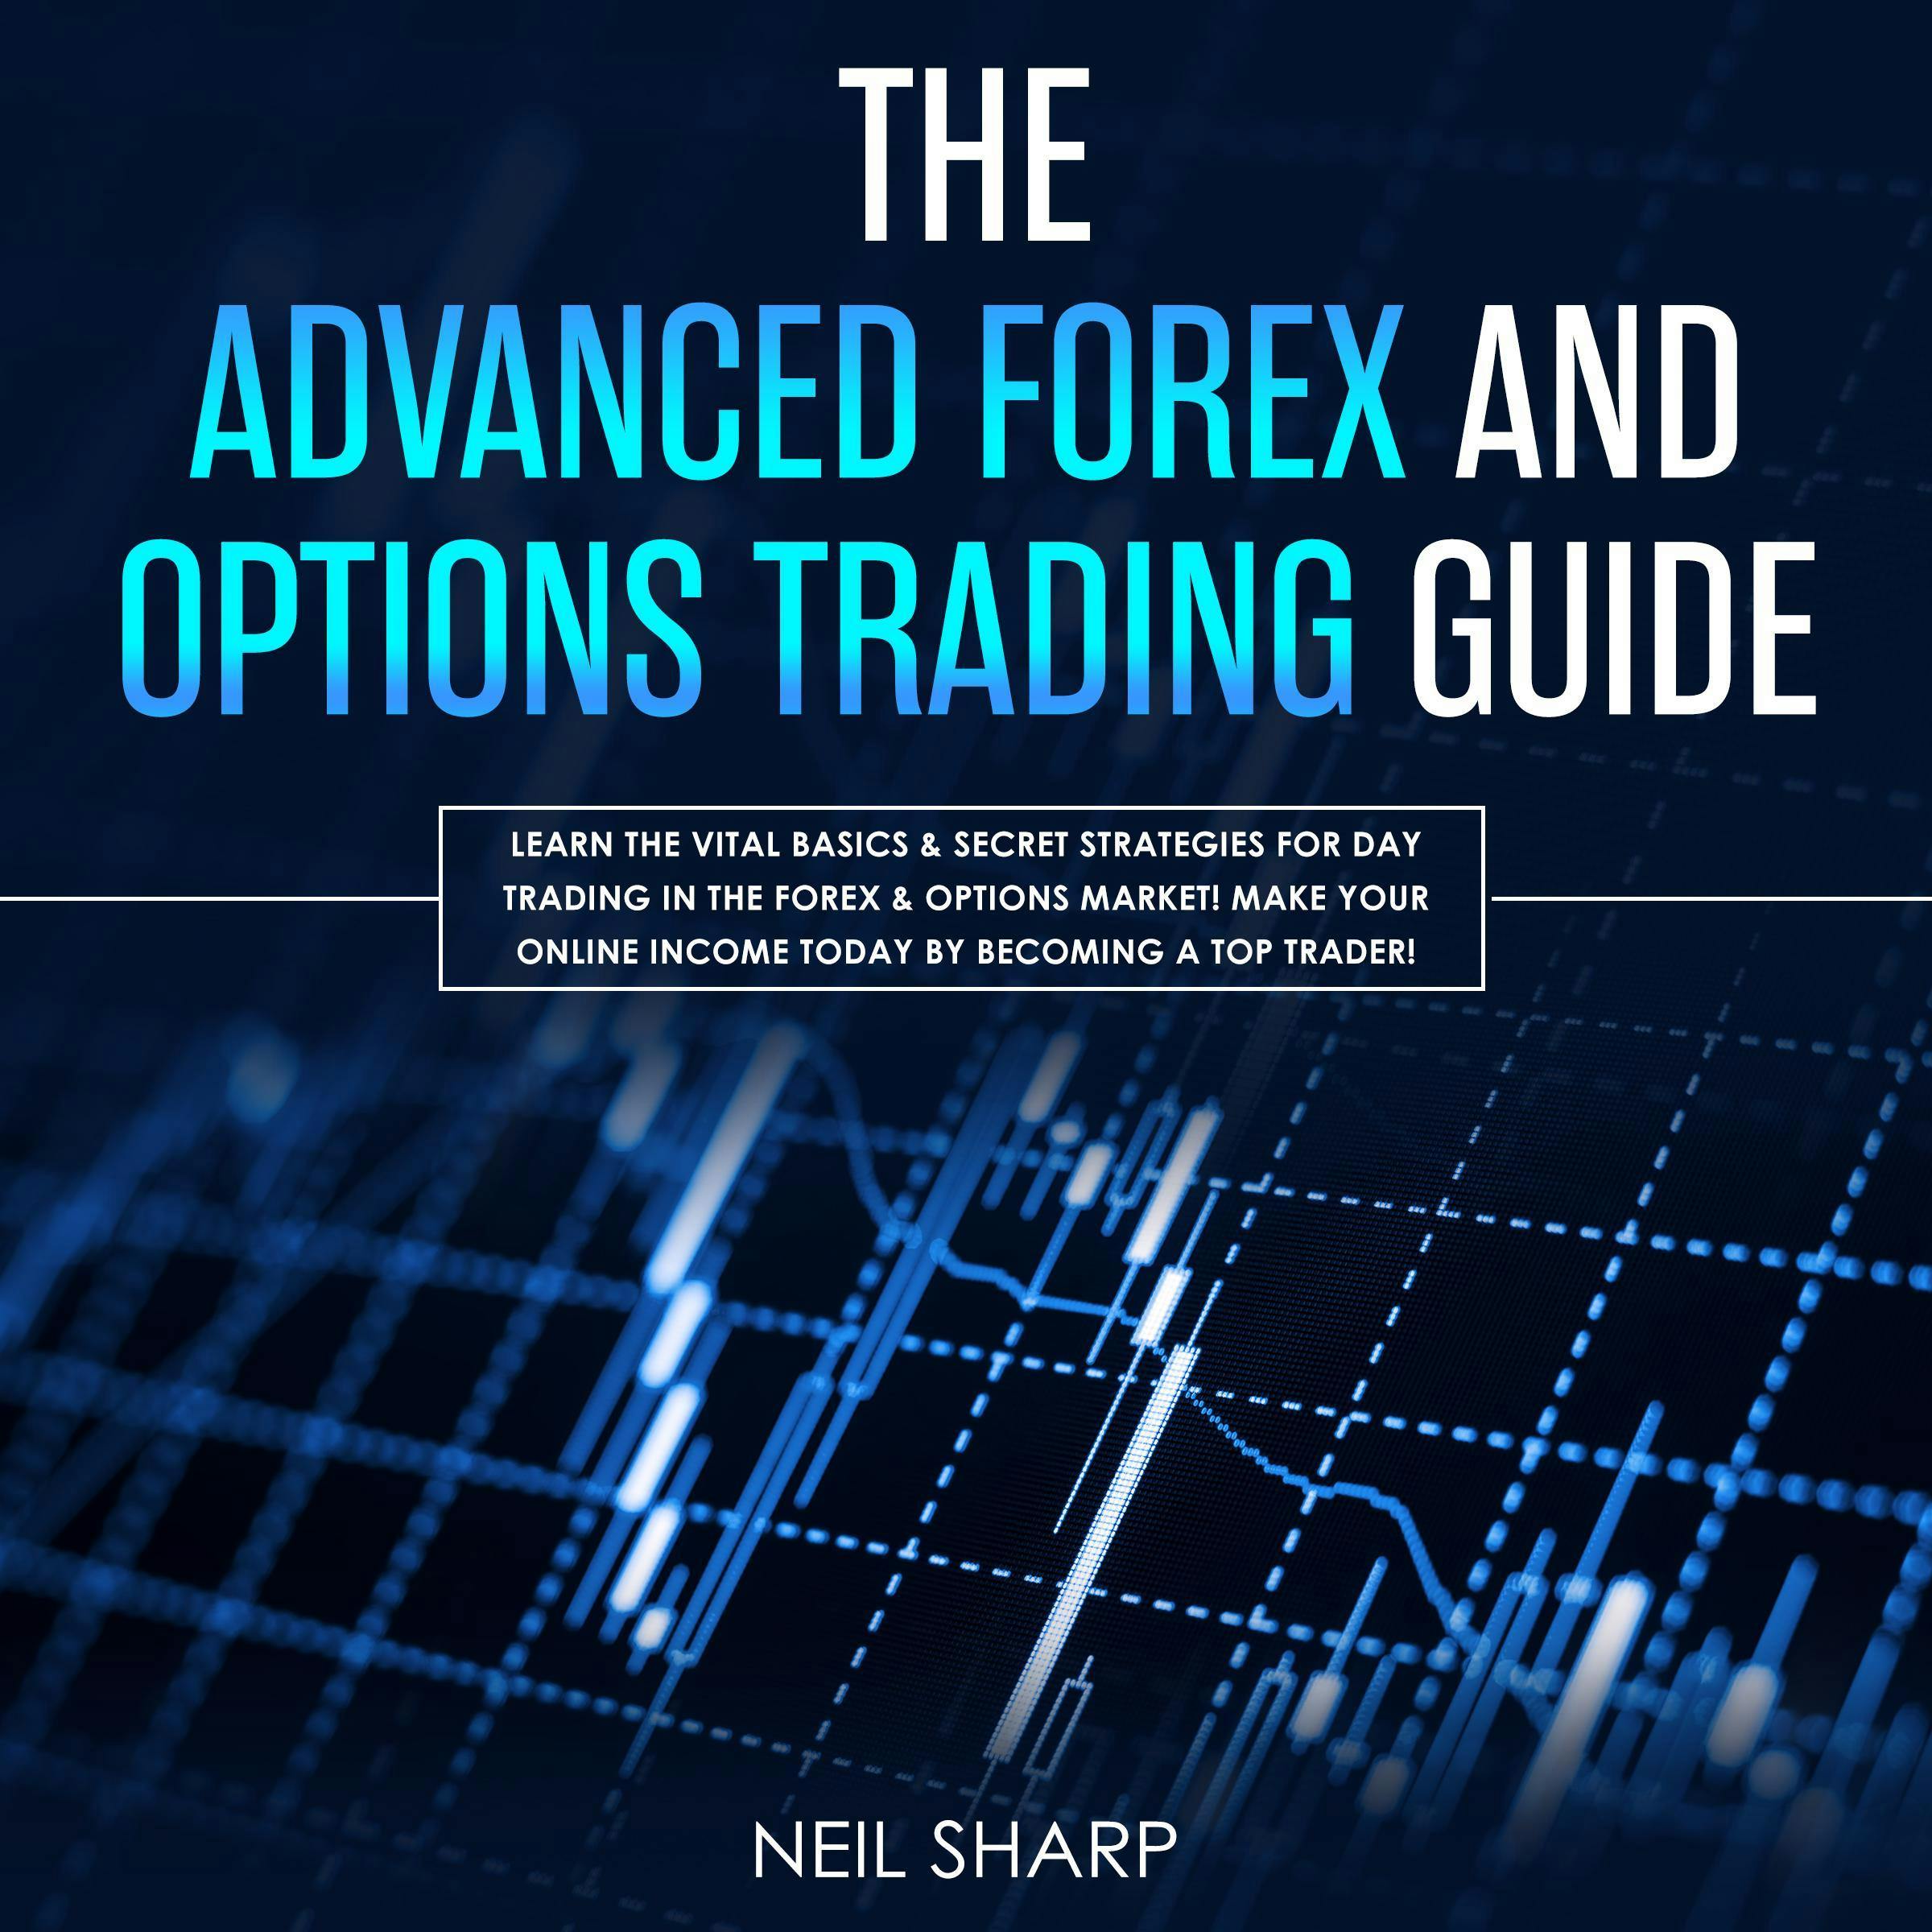 The Advanced Forex and Options Trading Guide: Learn the Vital Basics & Secret Strategies for Day Trading in the Forex & Options Market! Make Your Online Income Today by Becoming a Top Trader! - undefined